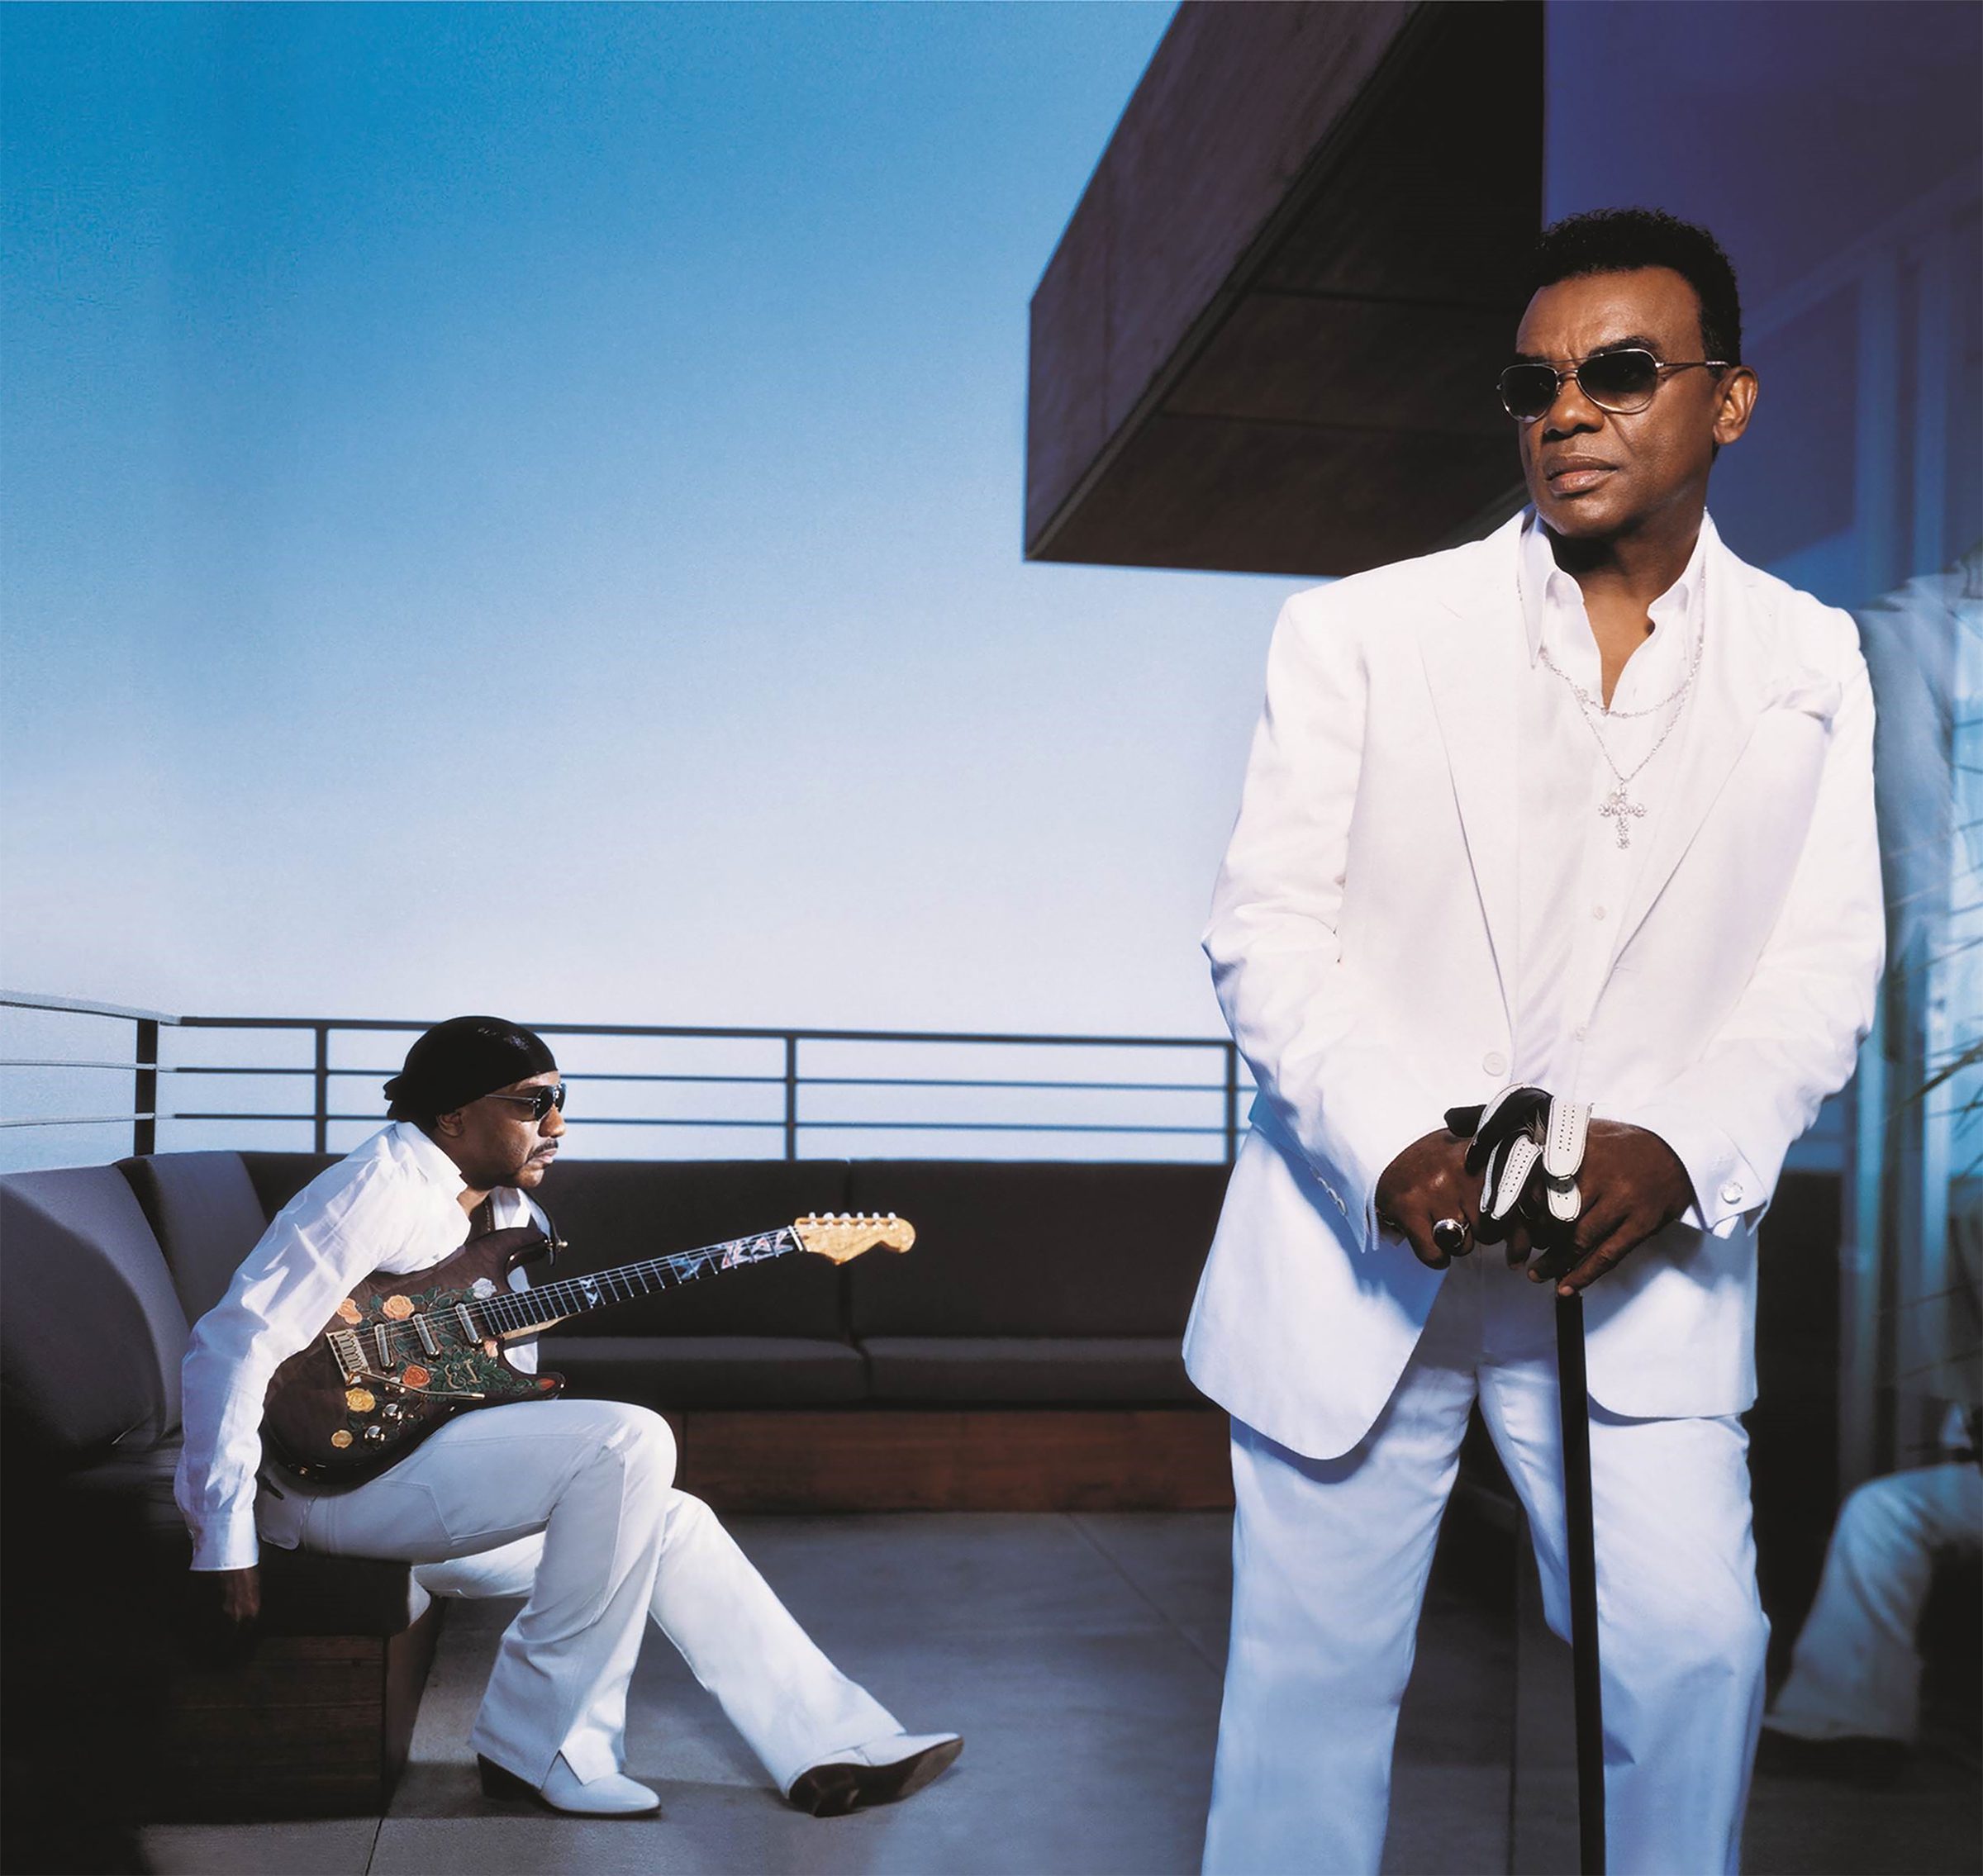 Isley Brothers to perform at casino